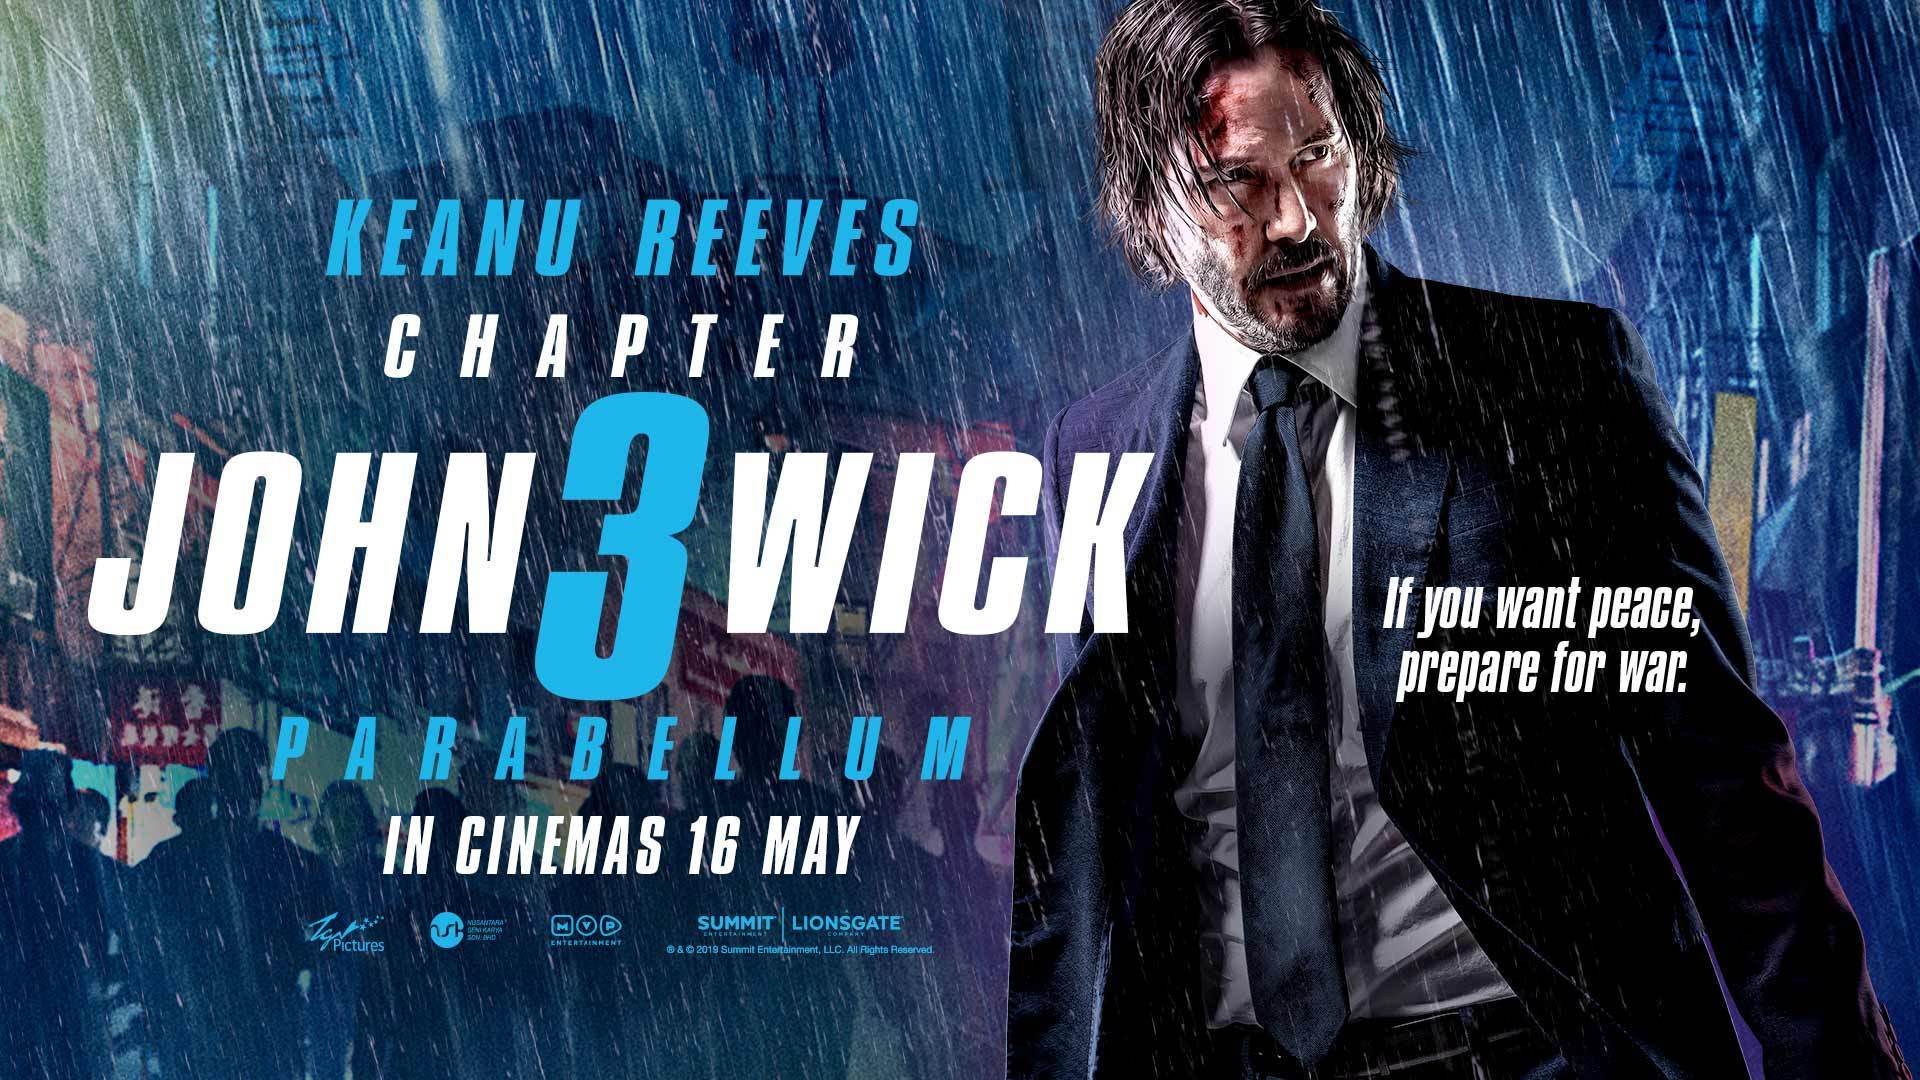 Contest: Win Premiere Passes To Watch John Wick: Chapter 3. Hype